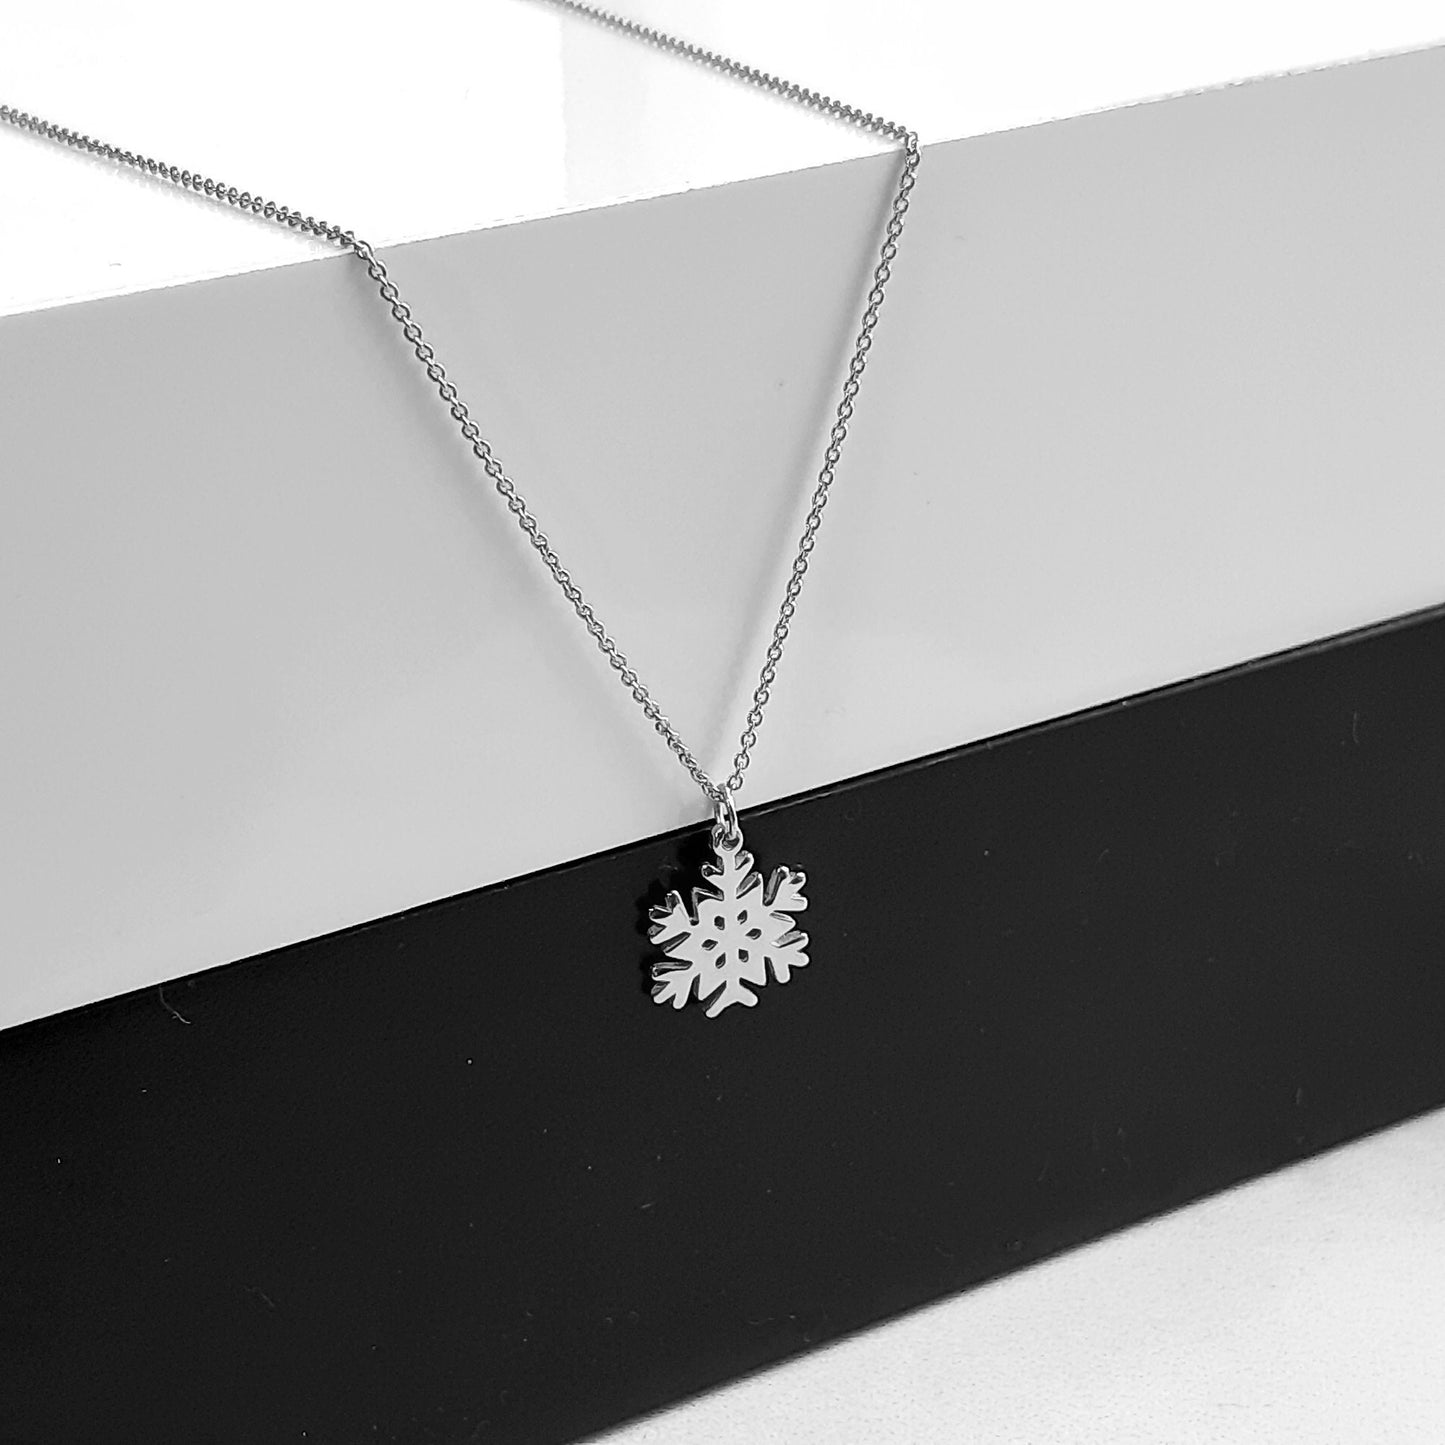 Snowflake Necklace, Dainty Snowflake Necklace, Solid Gold Snowflake Necklace, Winter Jewelry 14k gold necklace layered necklace gift for her